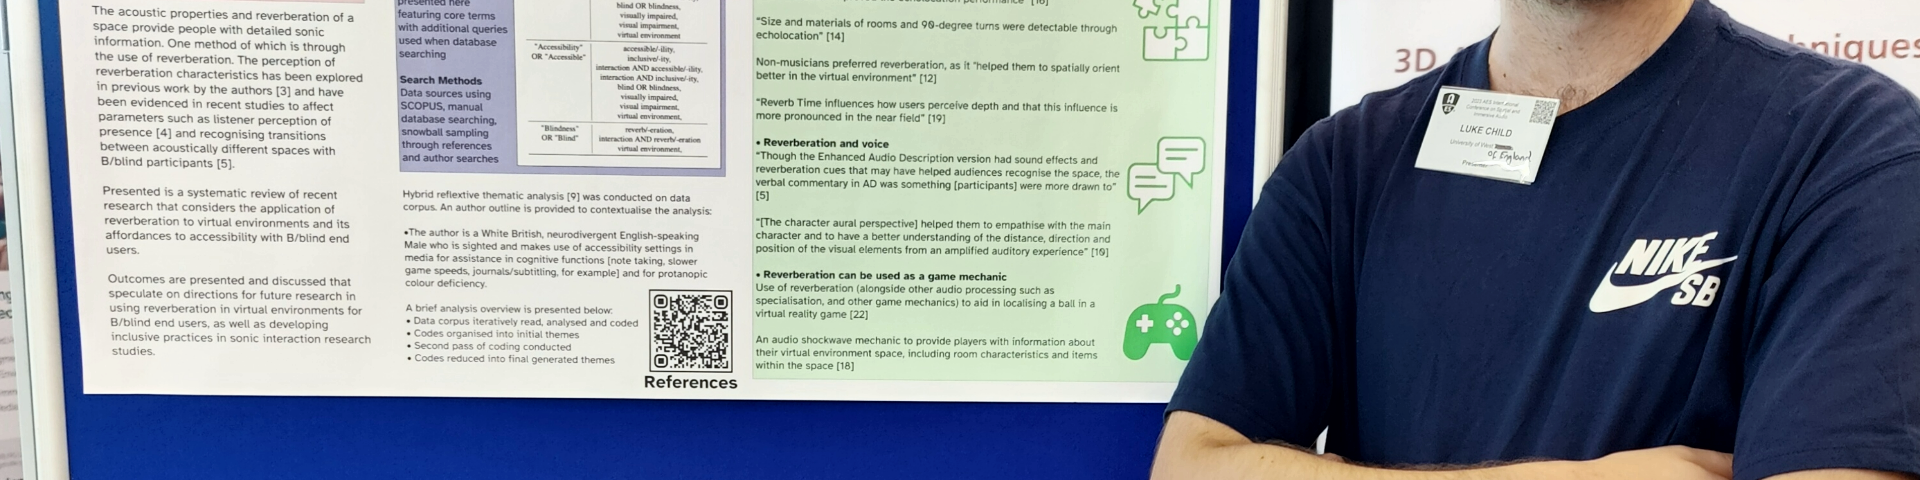 A close up of Luke at a conference power posing in front of an academic poster displaying his work.